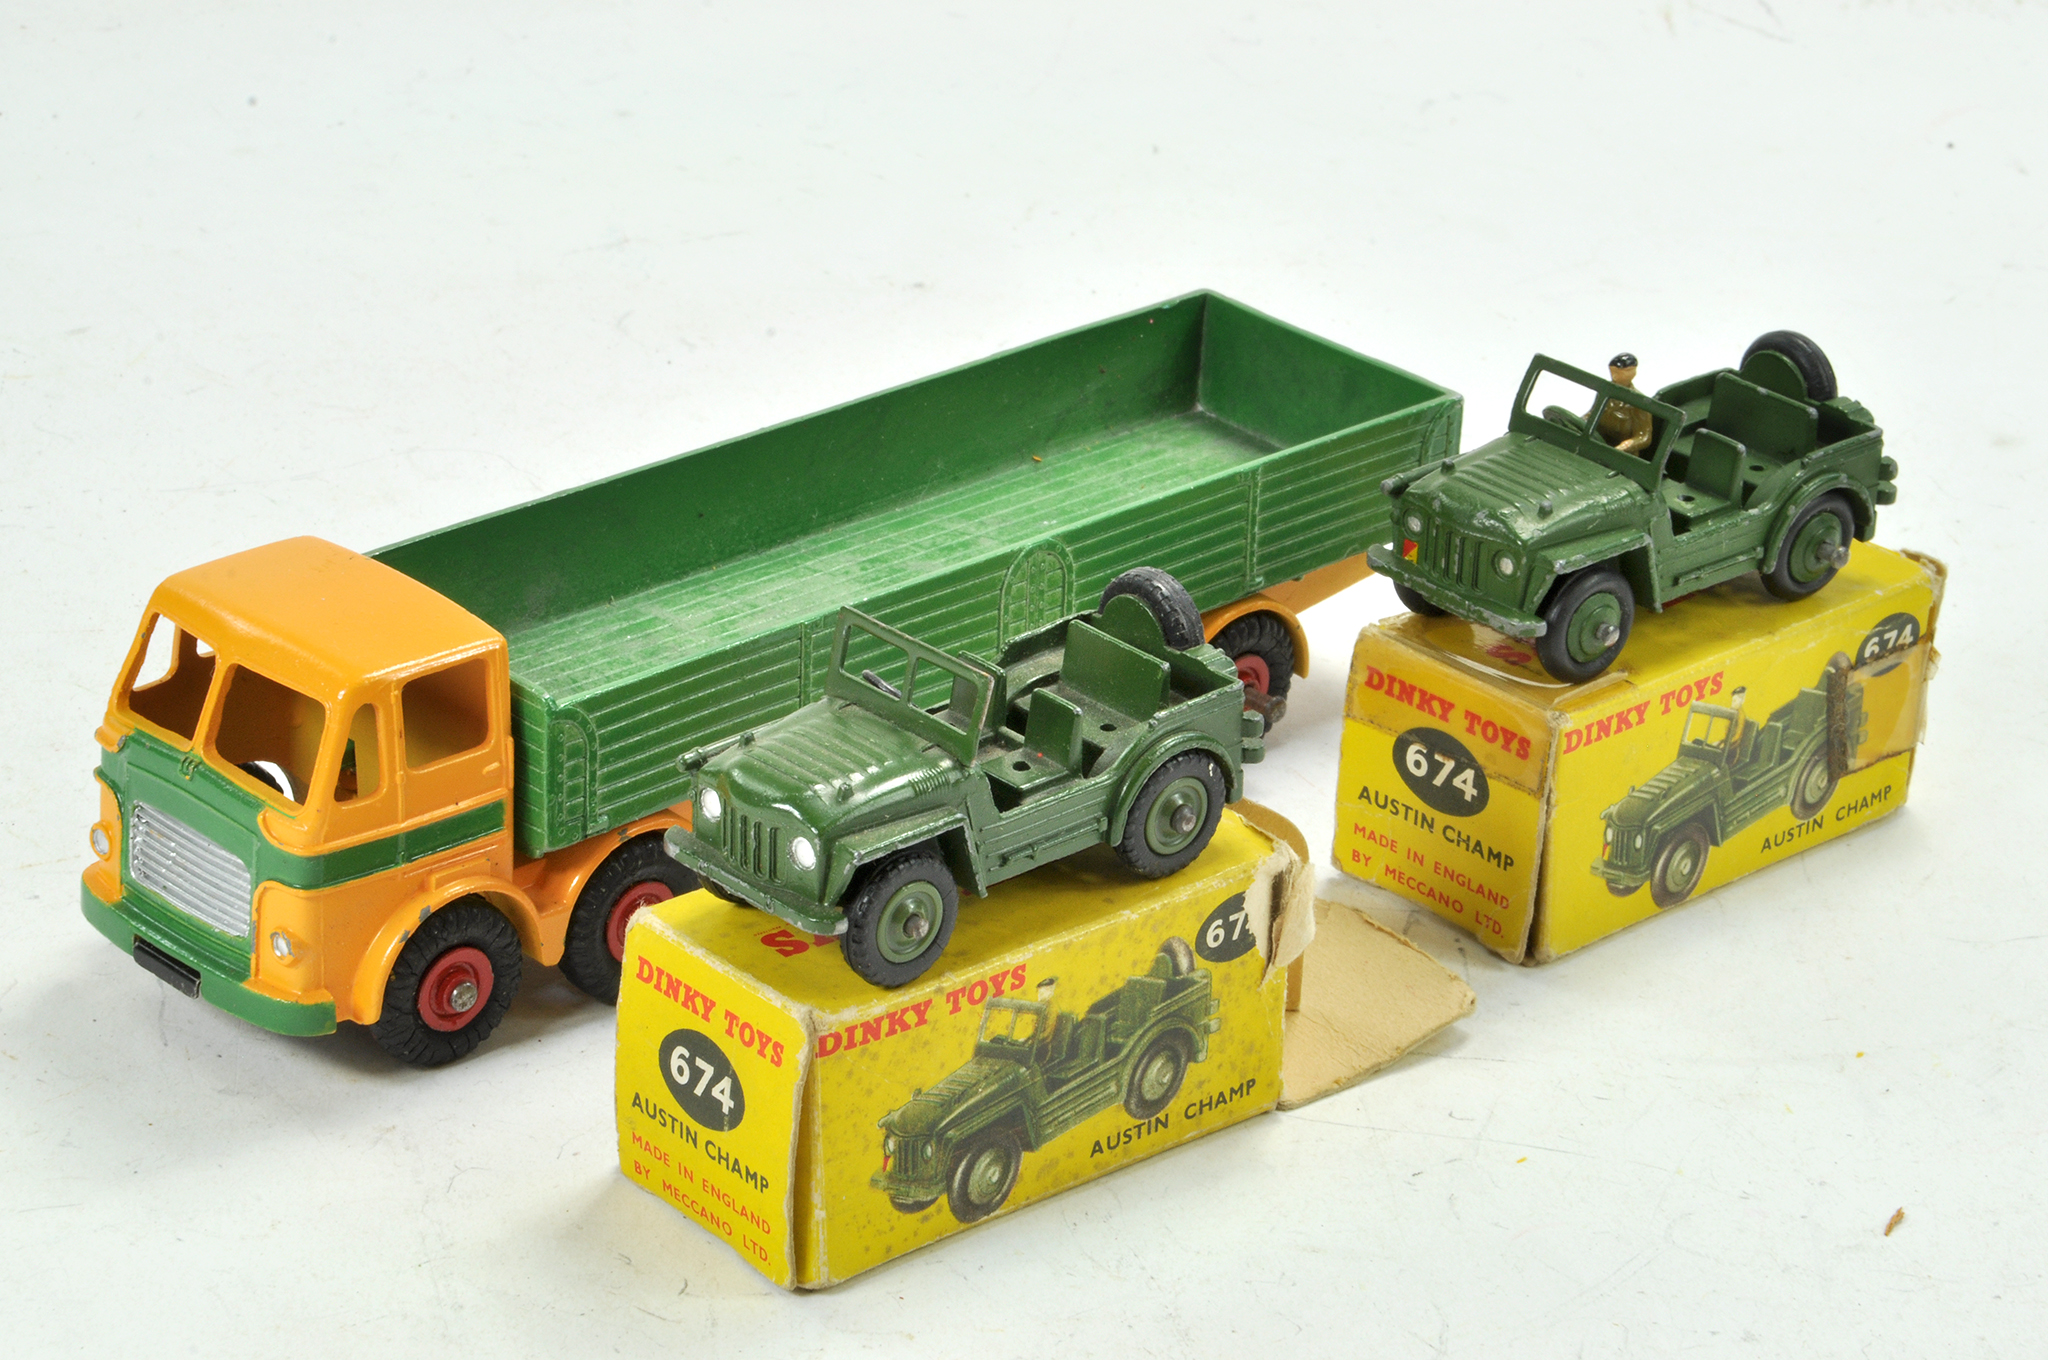 Dinky Leyland Octopus Lorry in Green and Yellow plus duo of Military issues. Generally good to